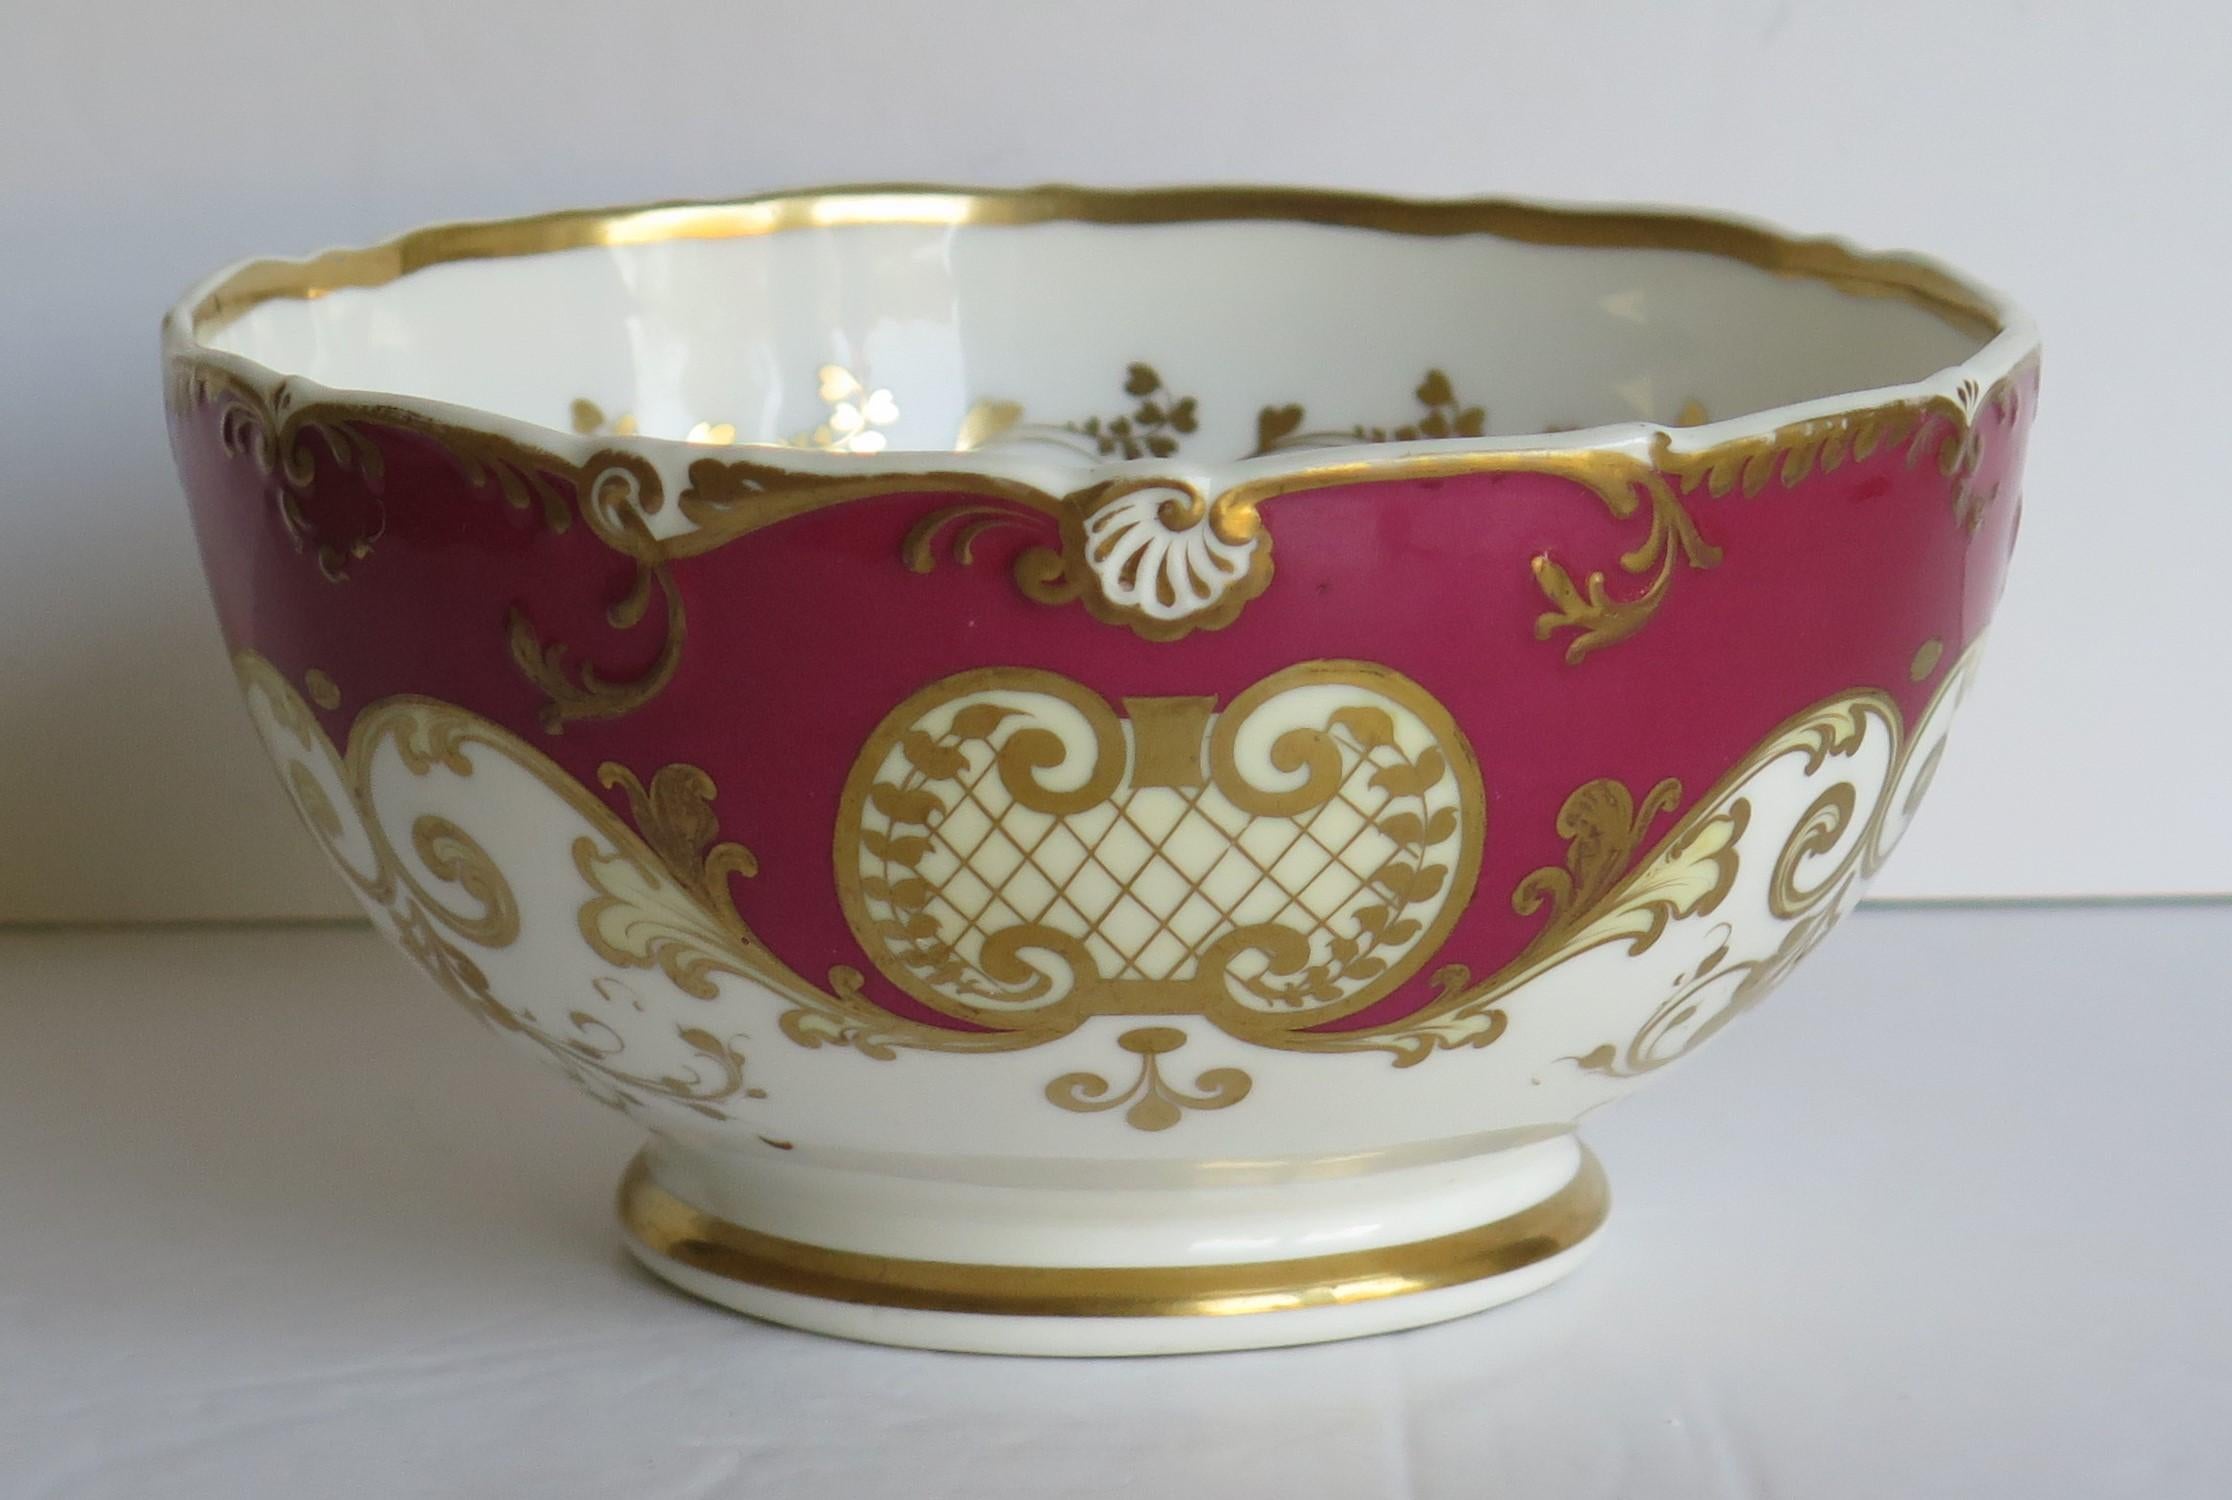 This is a fine porcelain Slop Bowl, beautifully hand painted in pattern 4789 and made by H & R Daniel of London Road, Stoke, Staffordshire Potteries, England.

Pieces by H & R Daniel are beautifully decorated and sought after, being very expensive